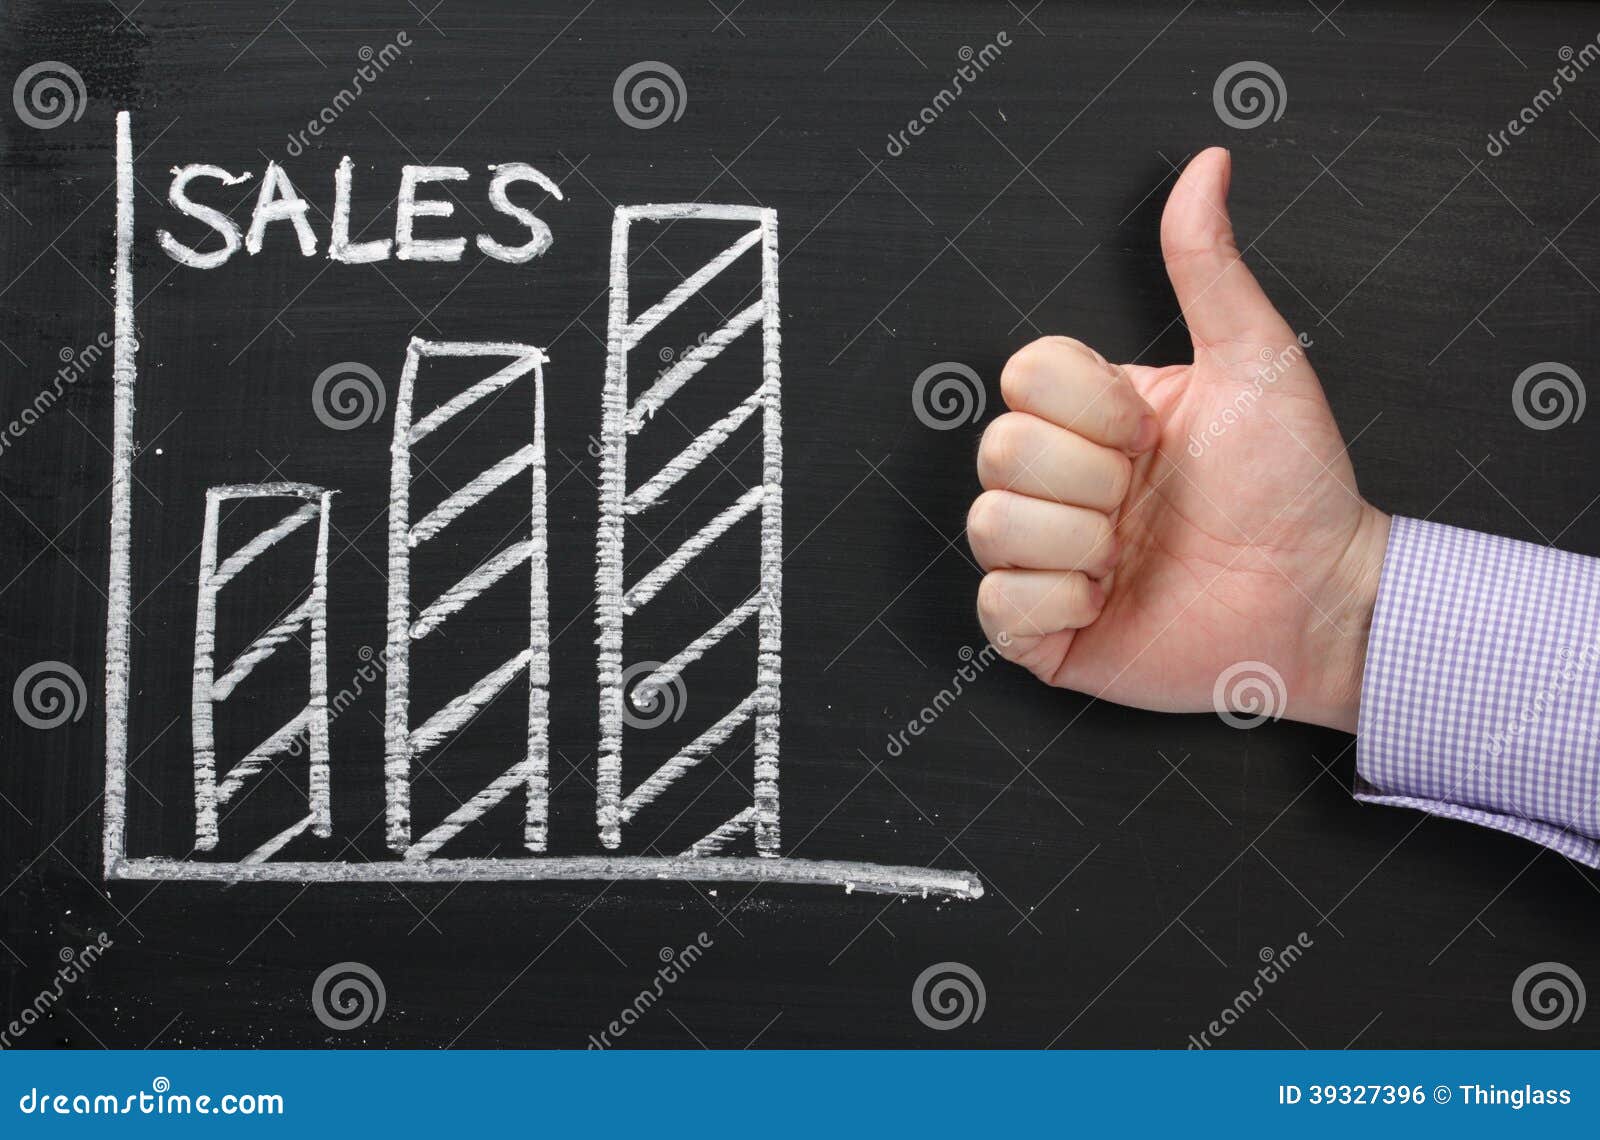 sales growth thumbs up